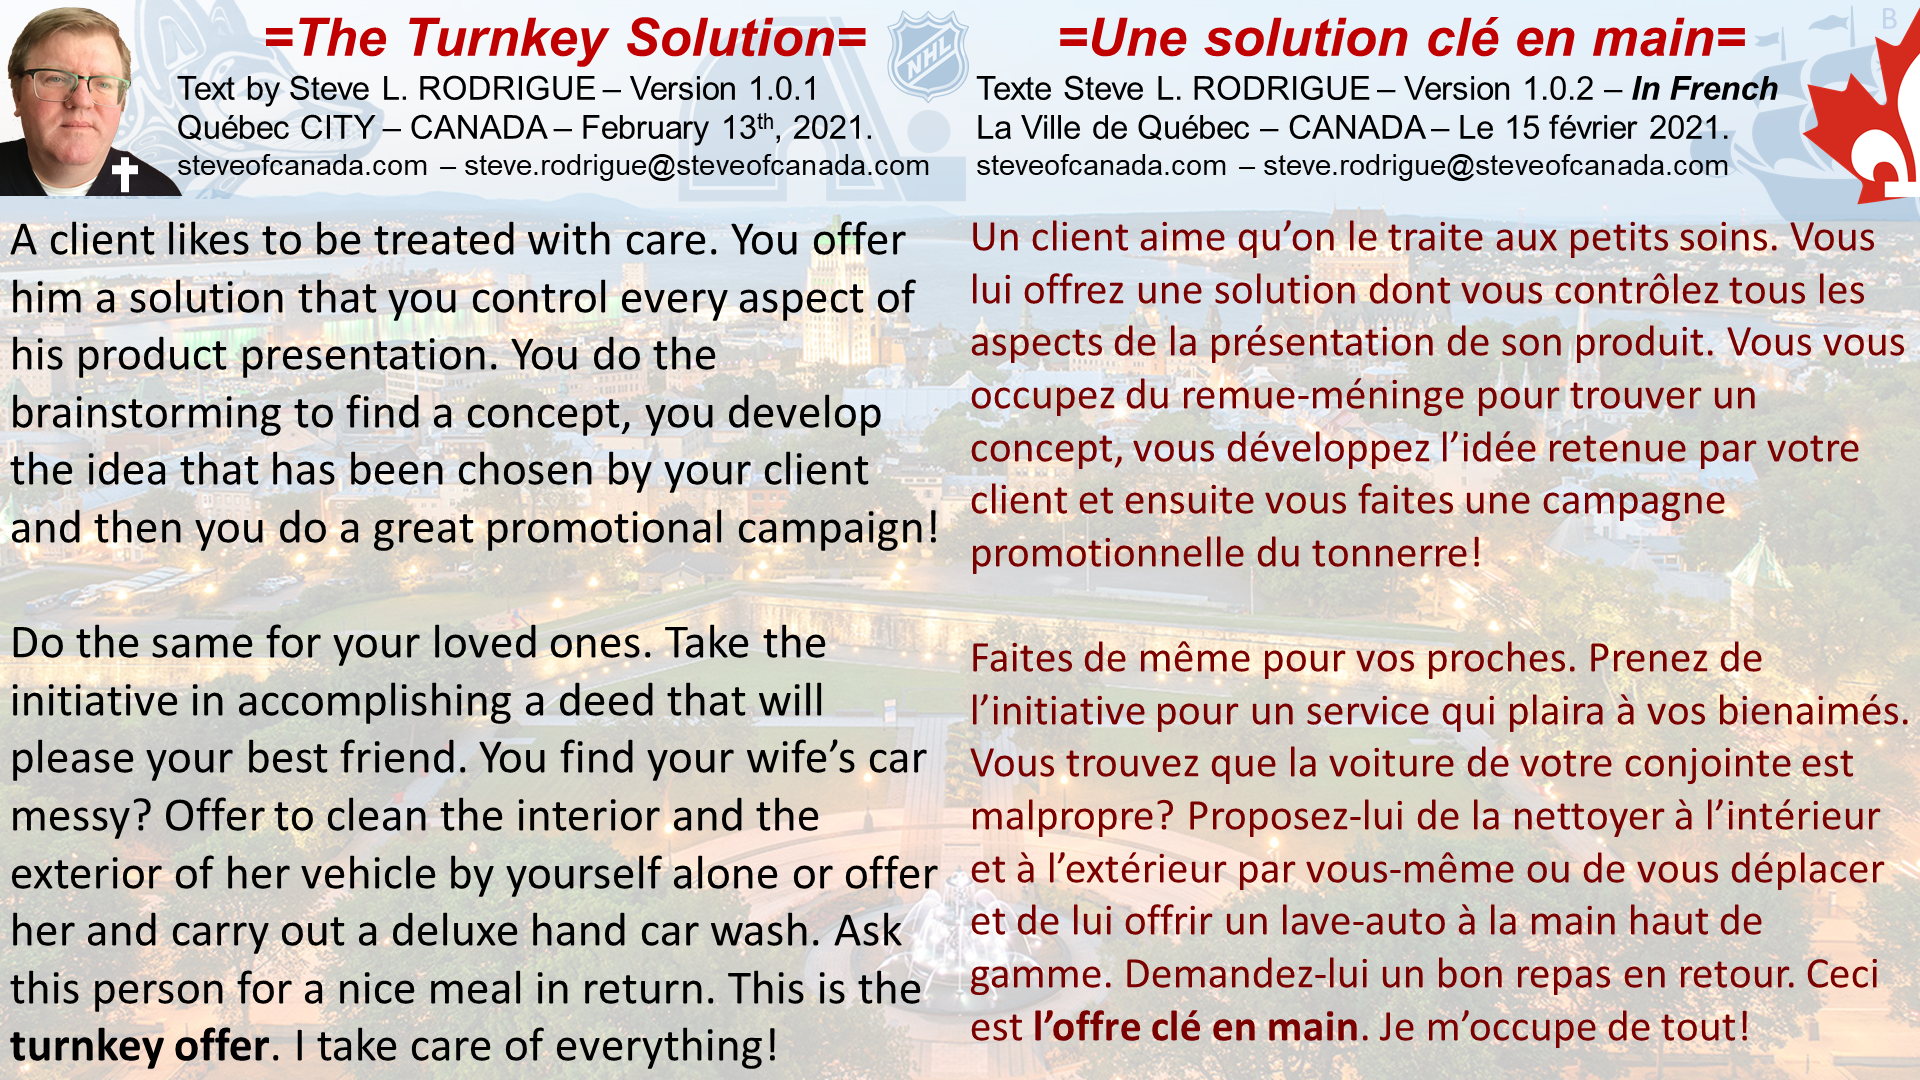 The Turnkey solution